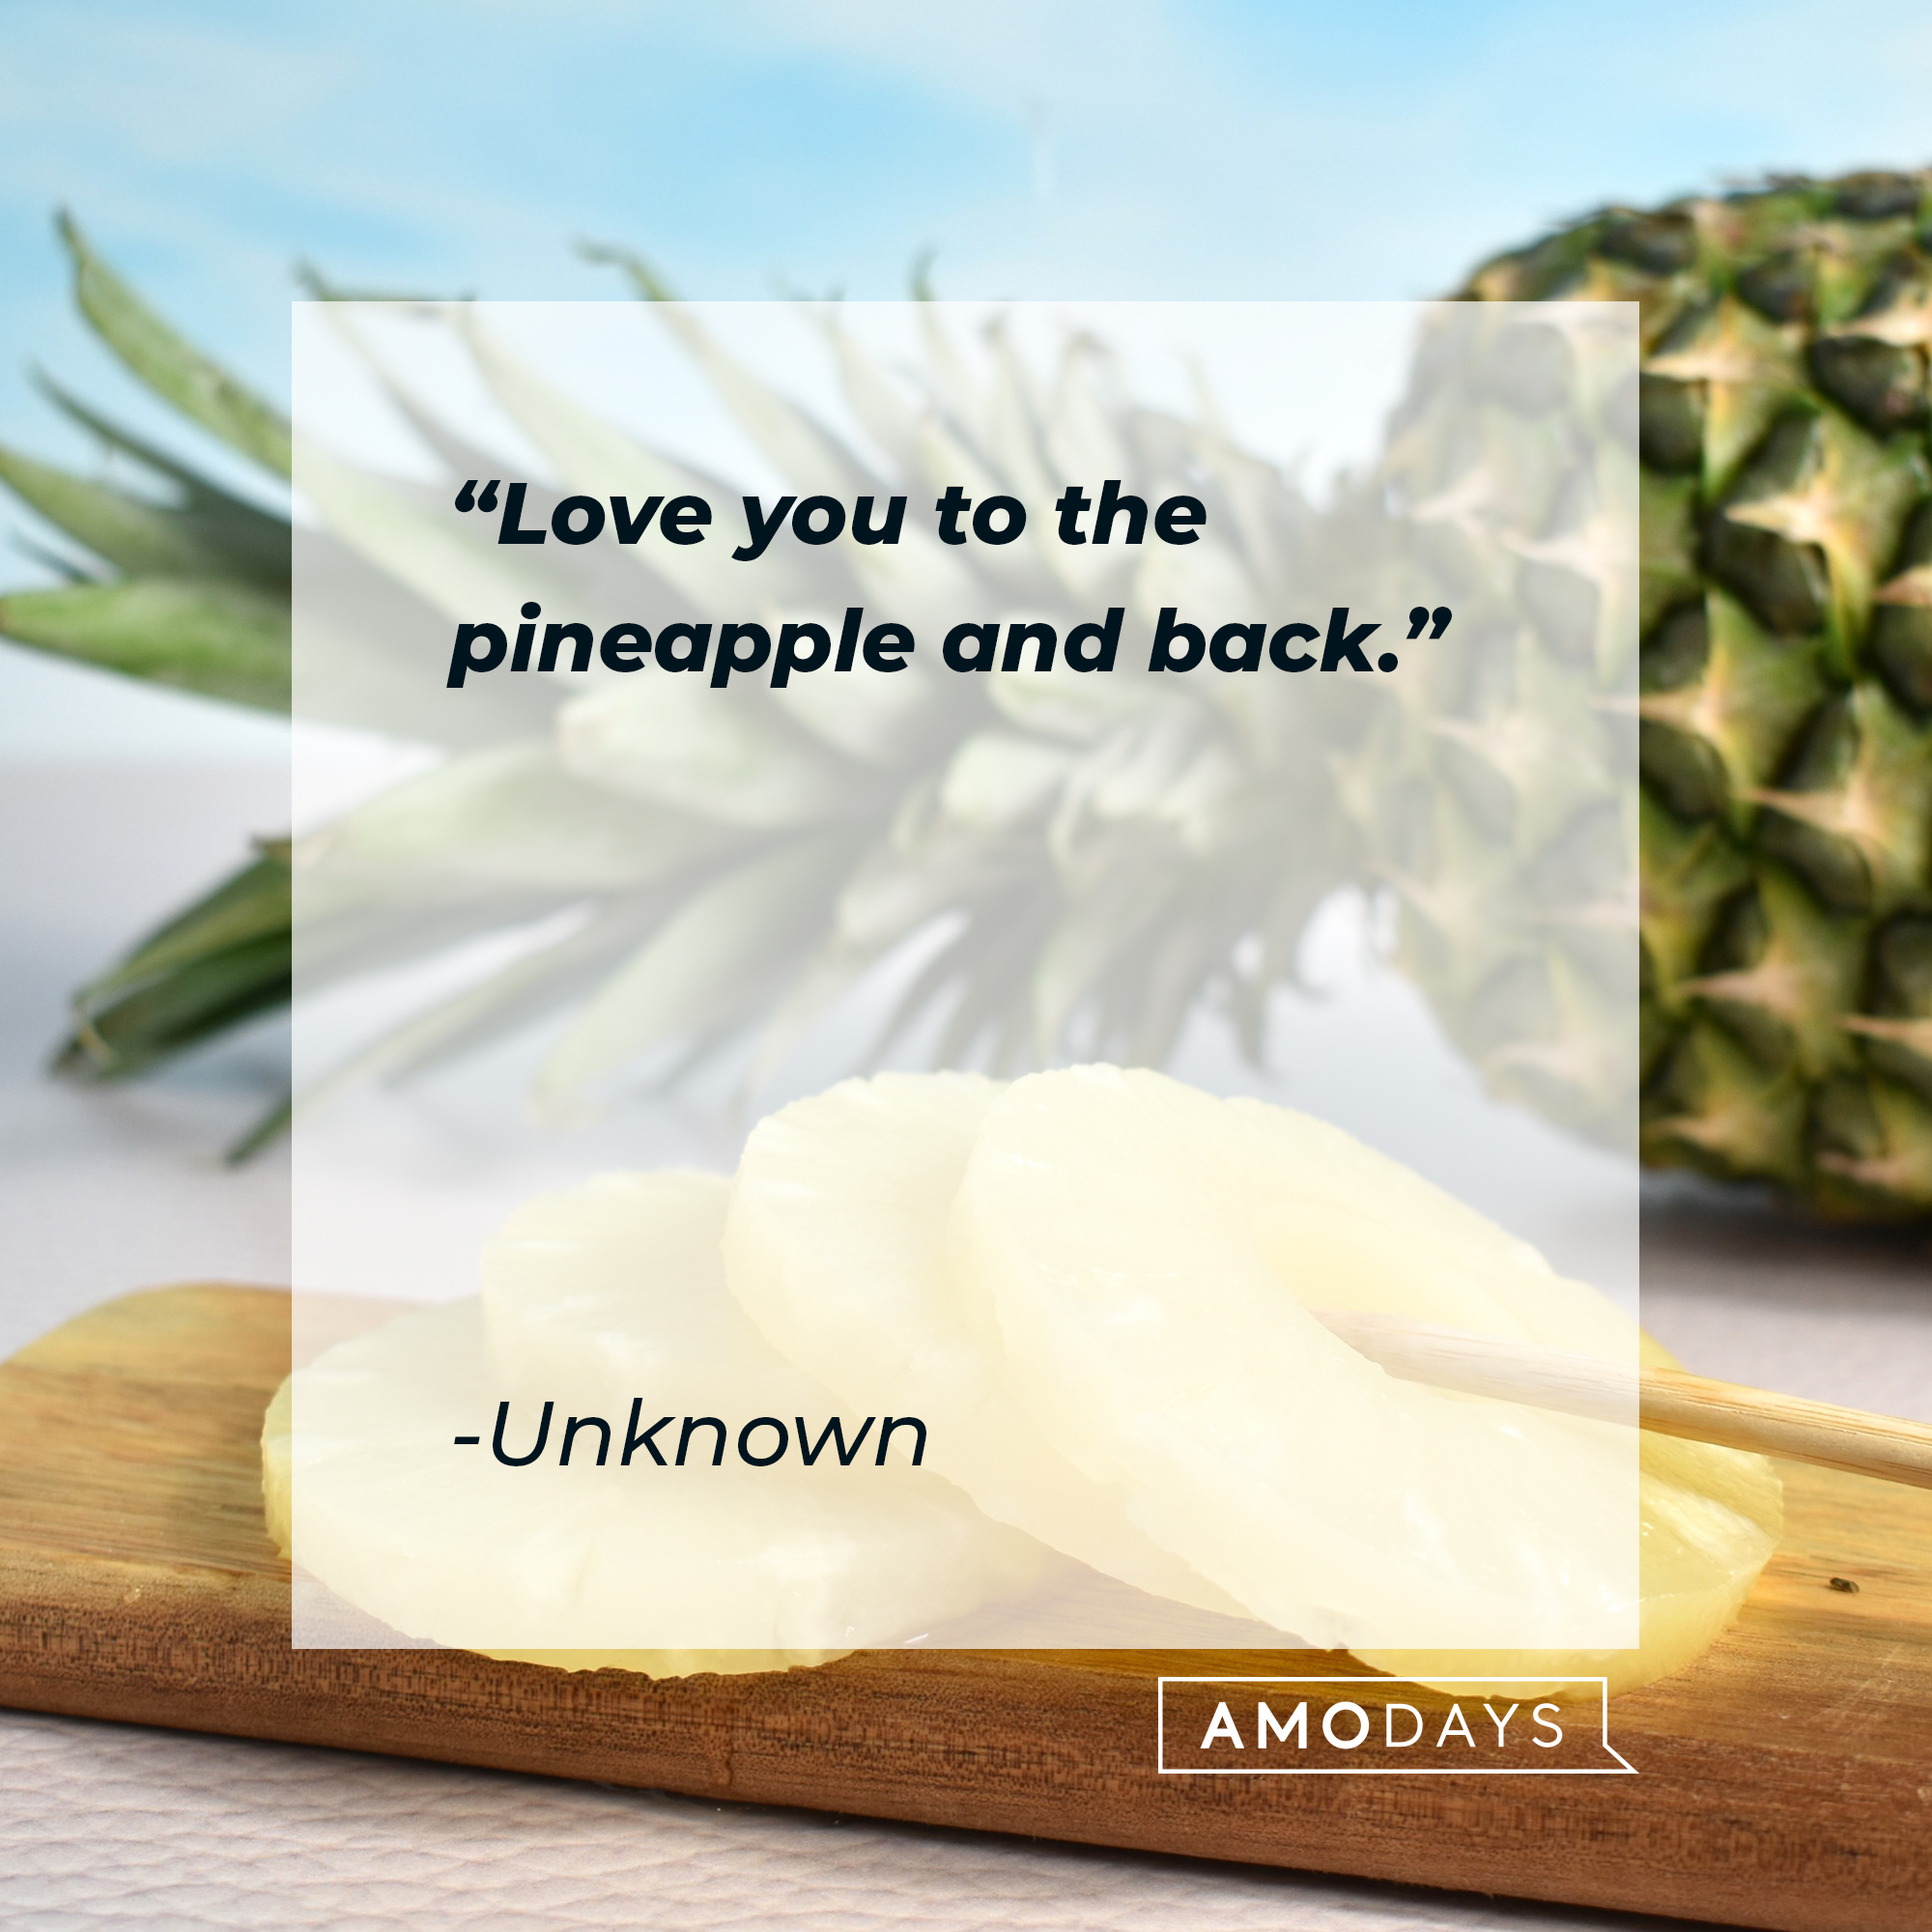 A quote from an unknown source: "Love you to the pineapple and back." | Image: AmoDays